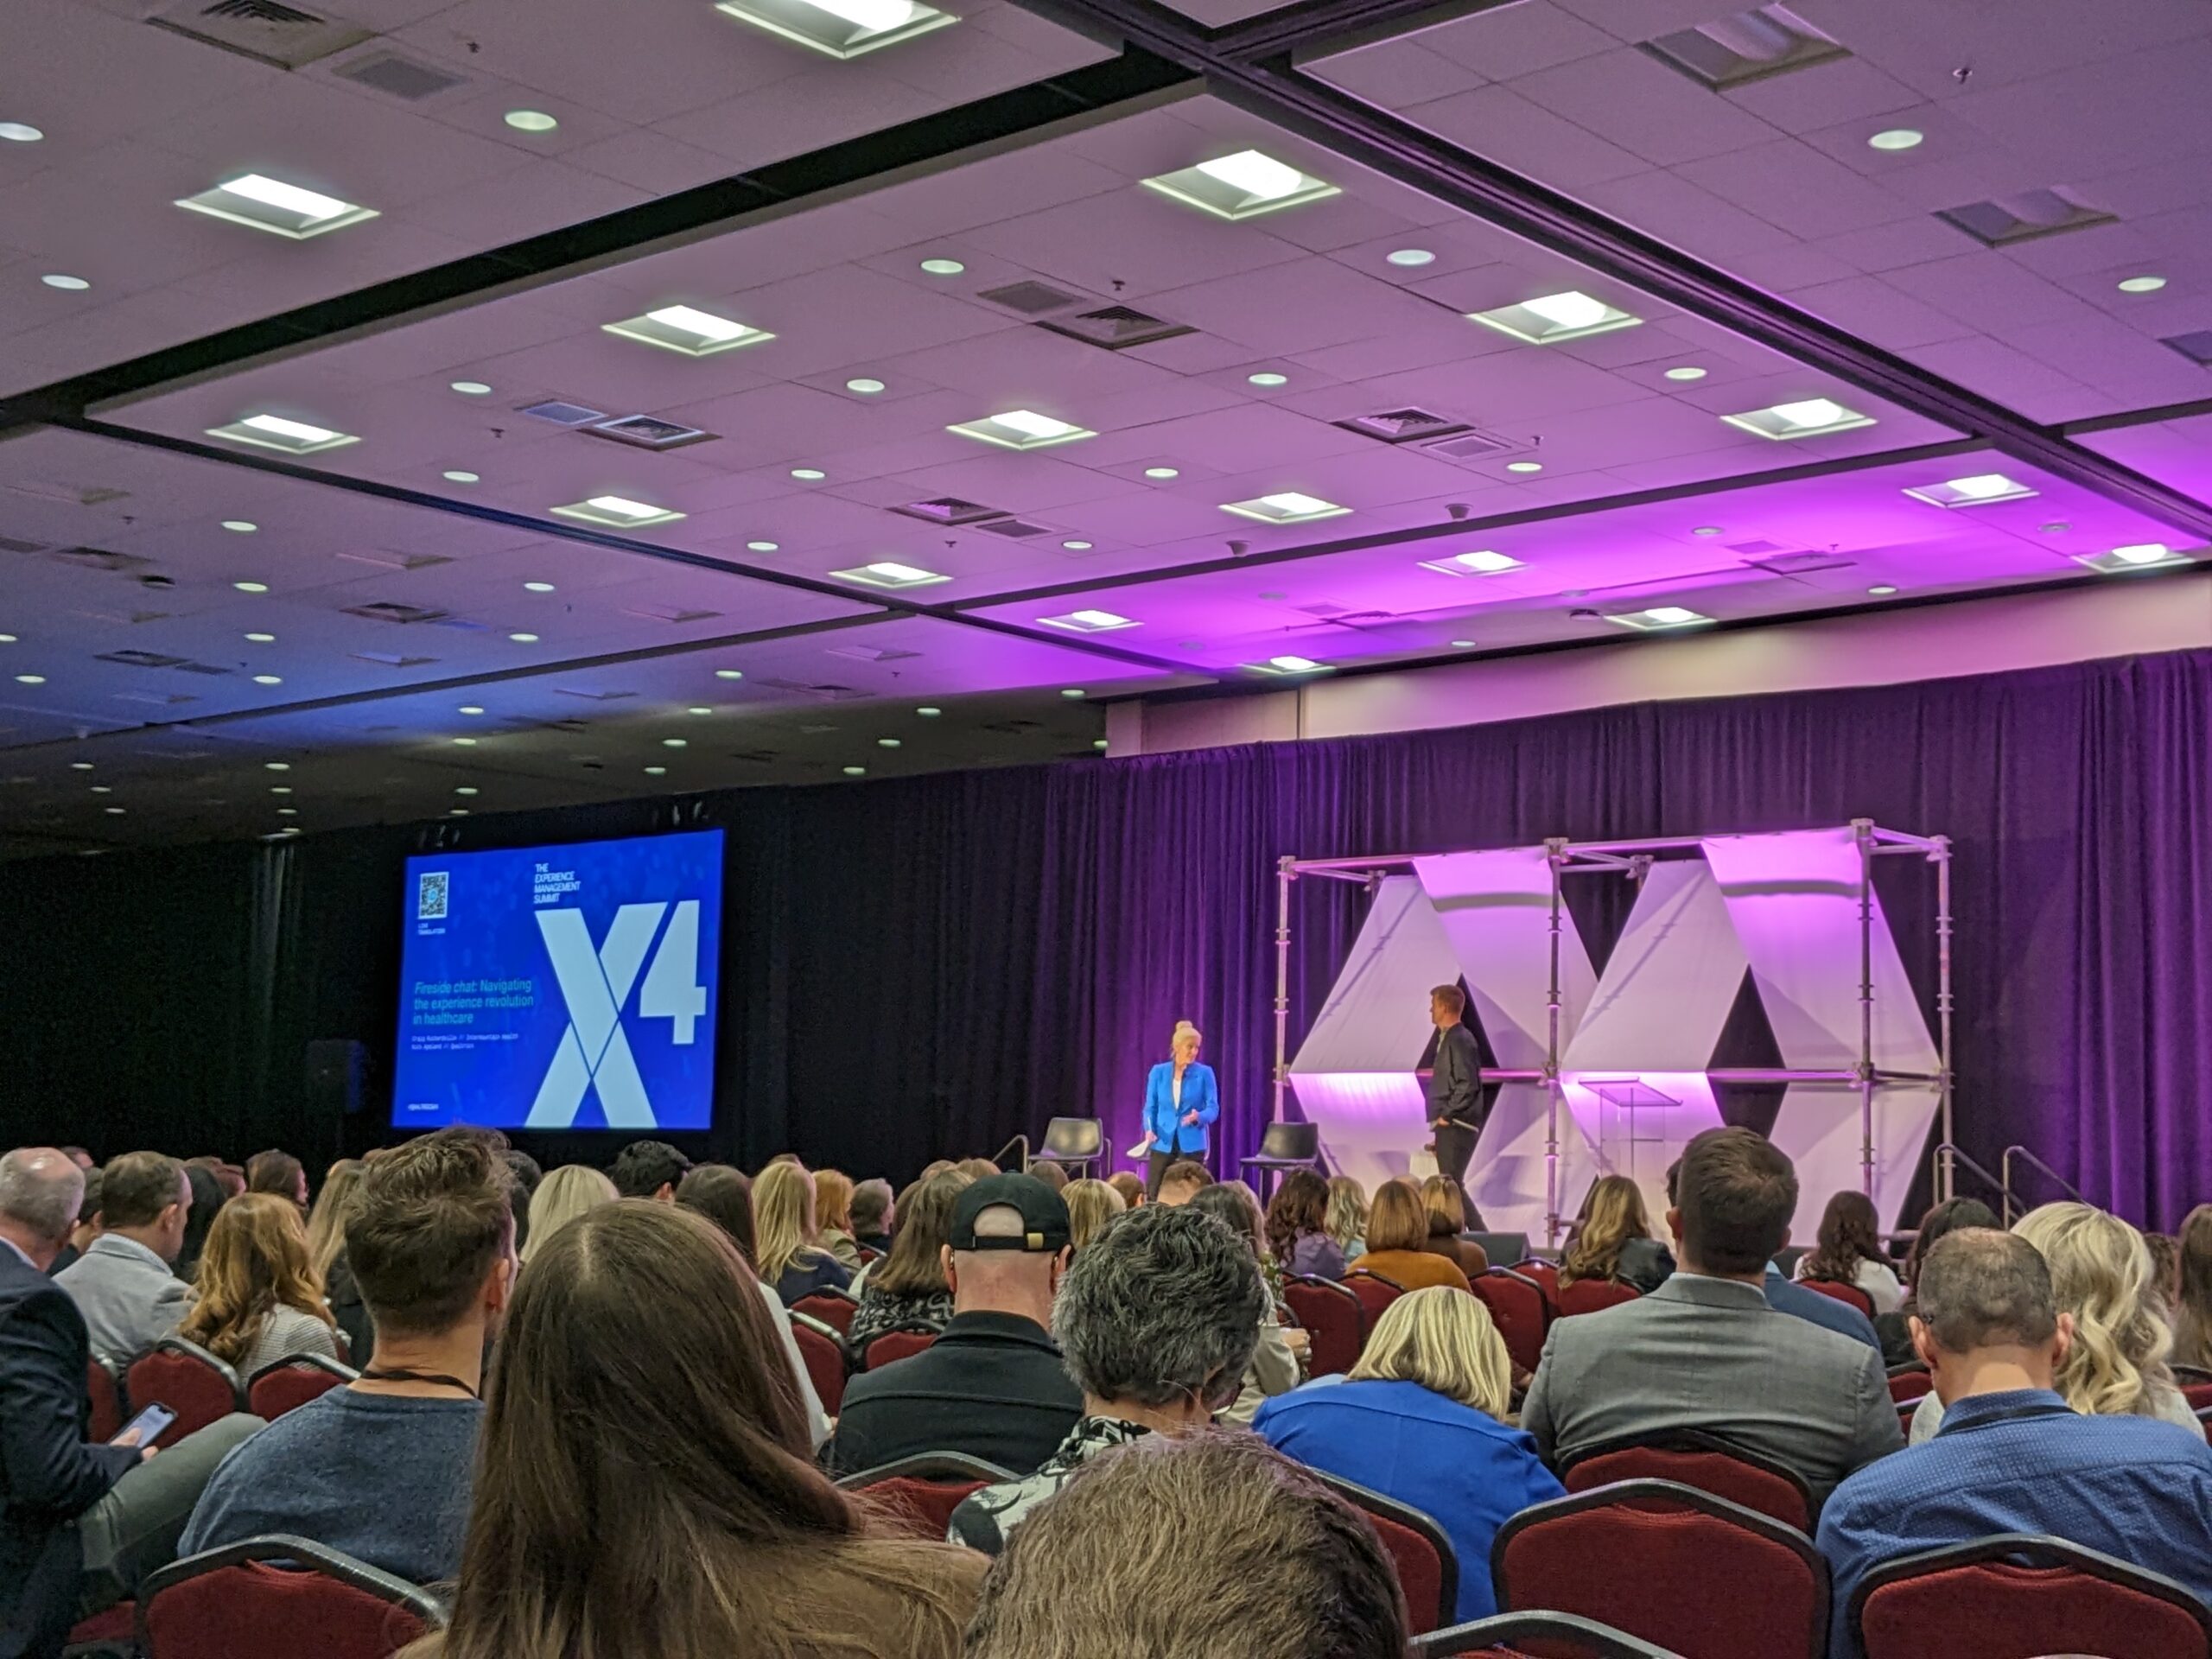 Patient Experience Insights from Qualtrics’ X4 Conference | Healthcare IT Today